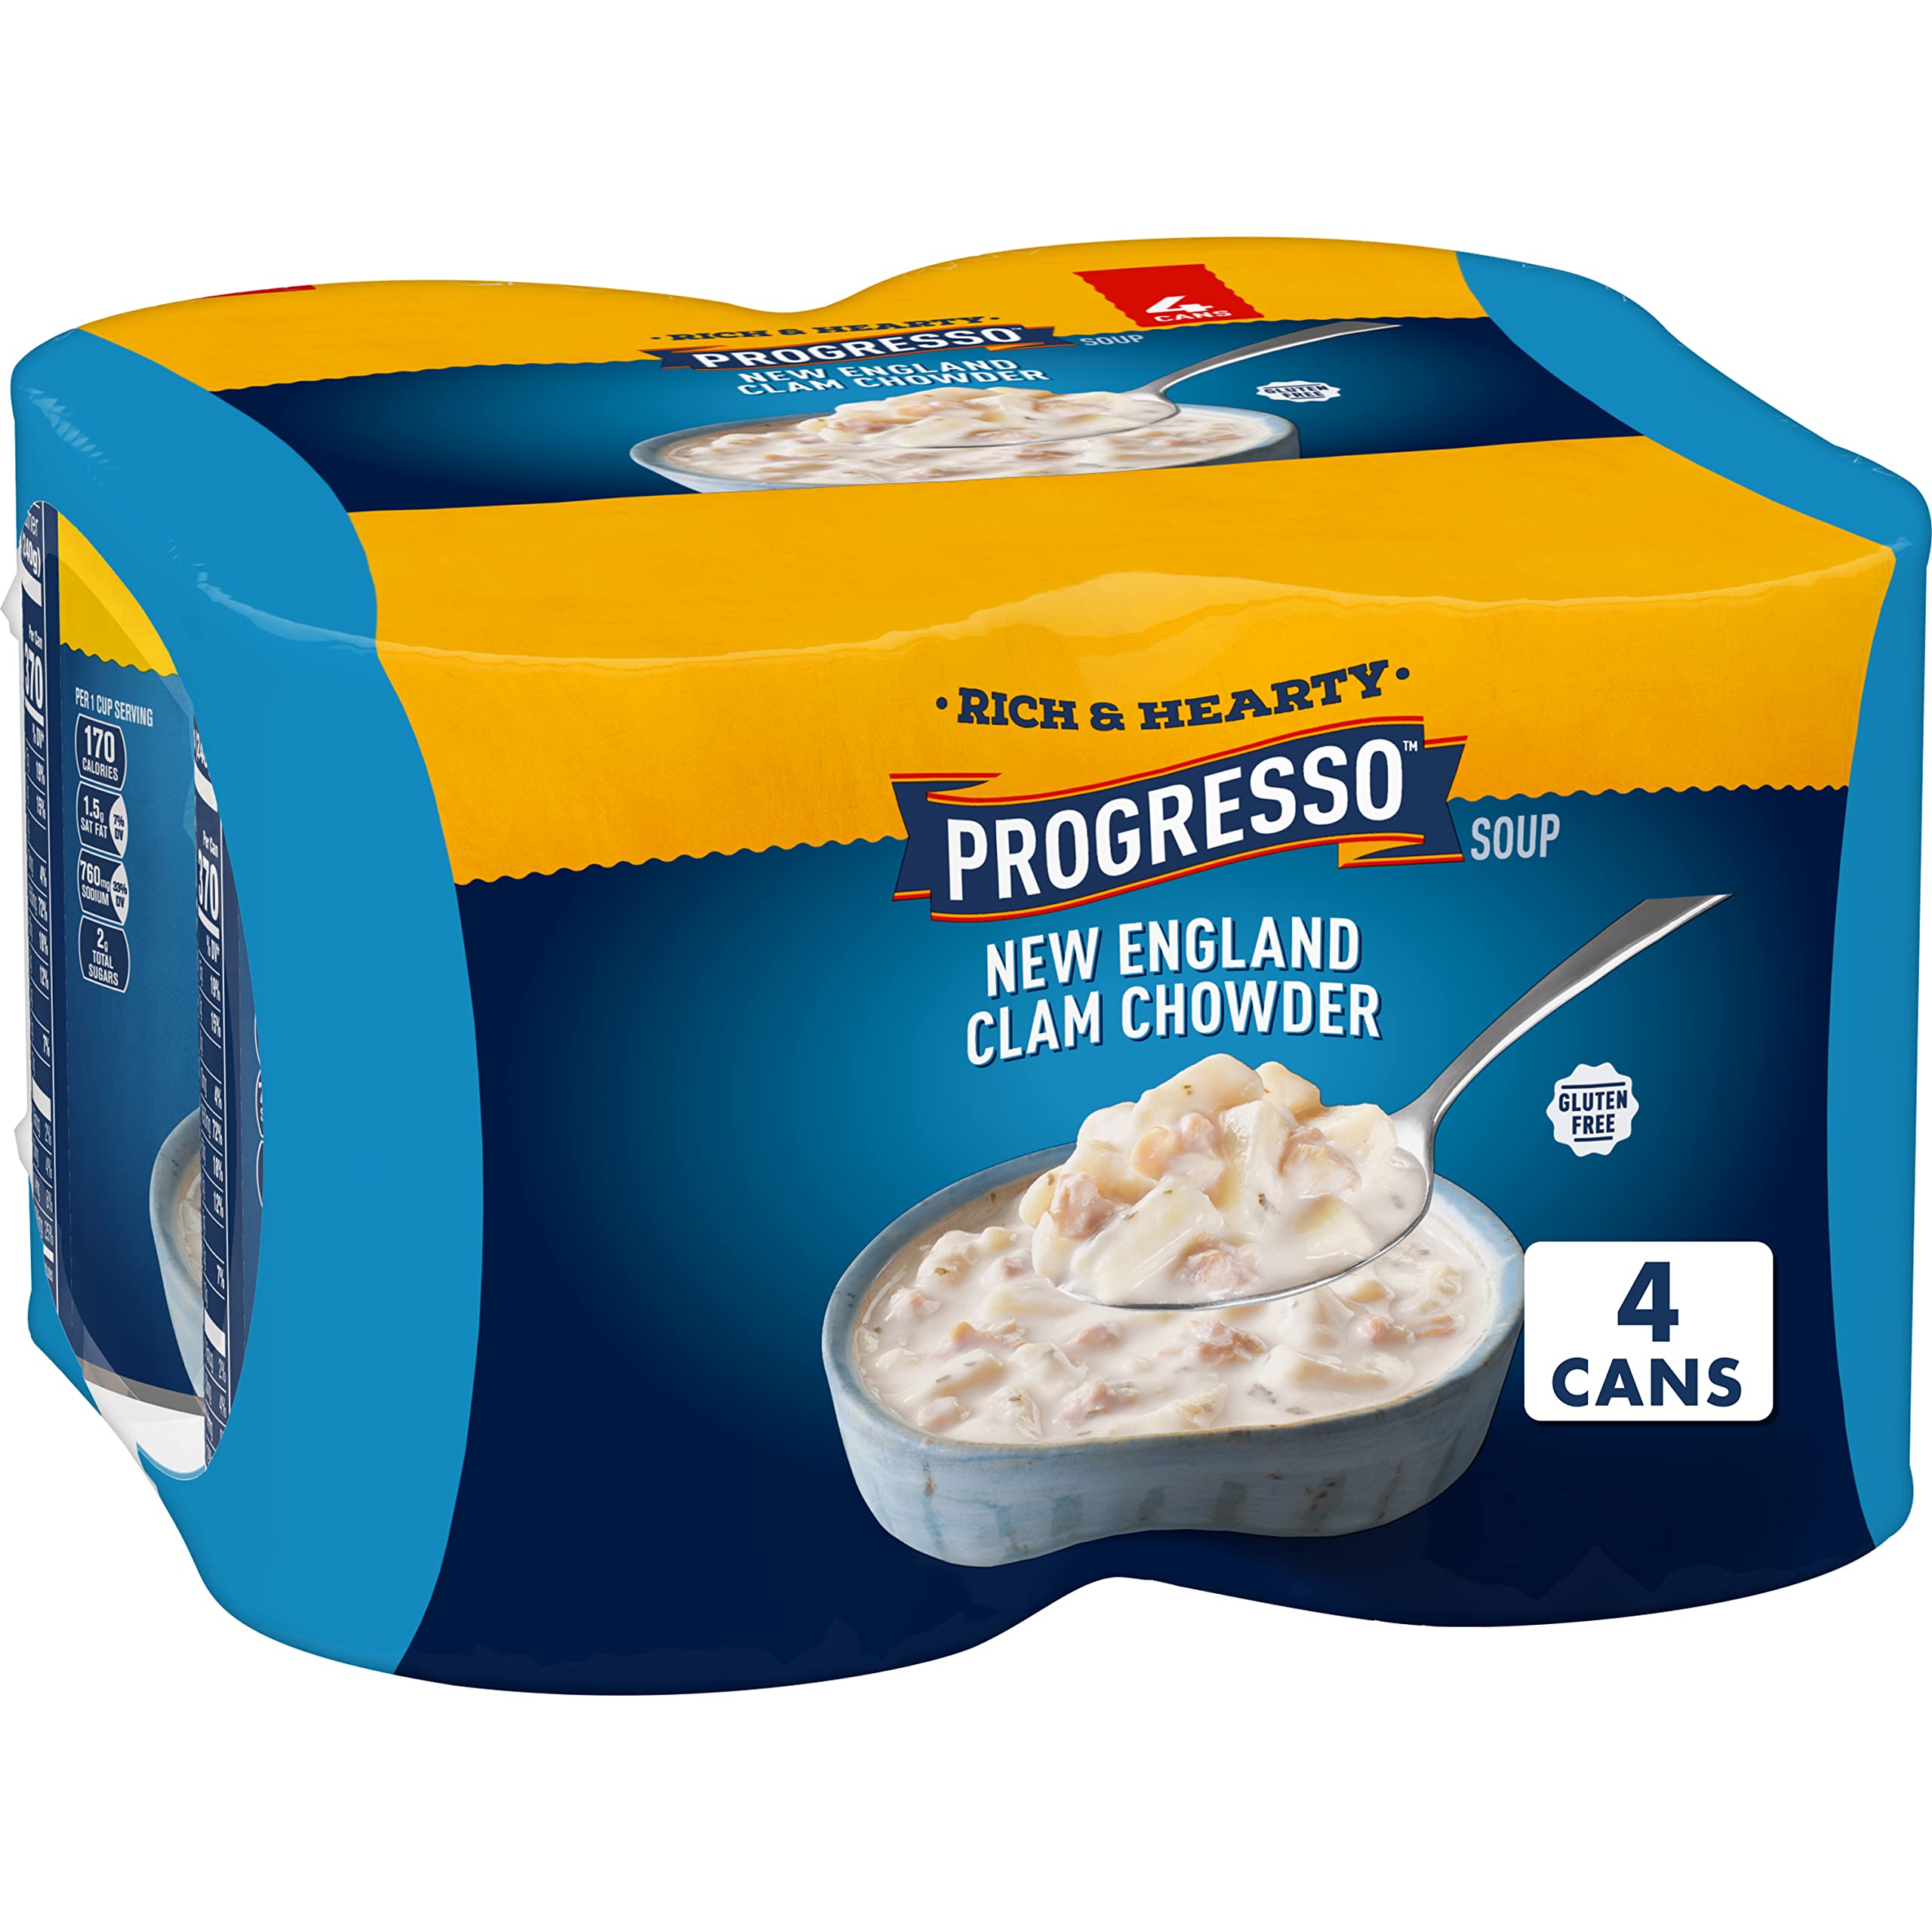 4-Pack 18.5-Oz Progresso Rich & Hearty, New England Clam Chowder Soup $6.55 ($1.60 each) w/ S&S + Free Shipping w/ Prime or $25+